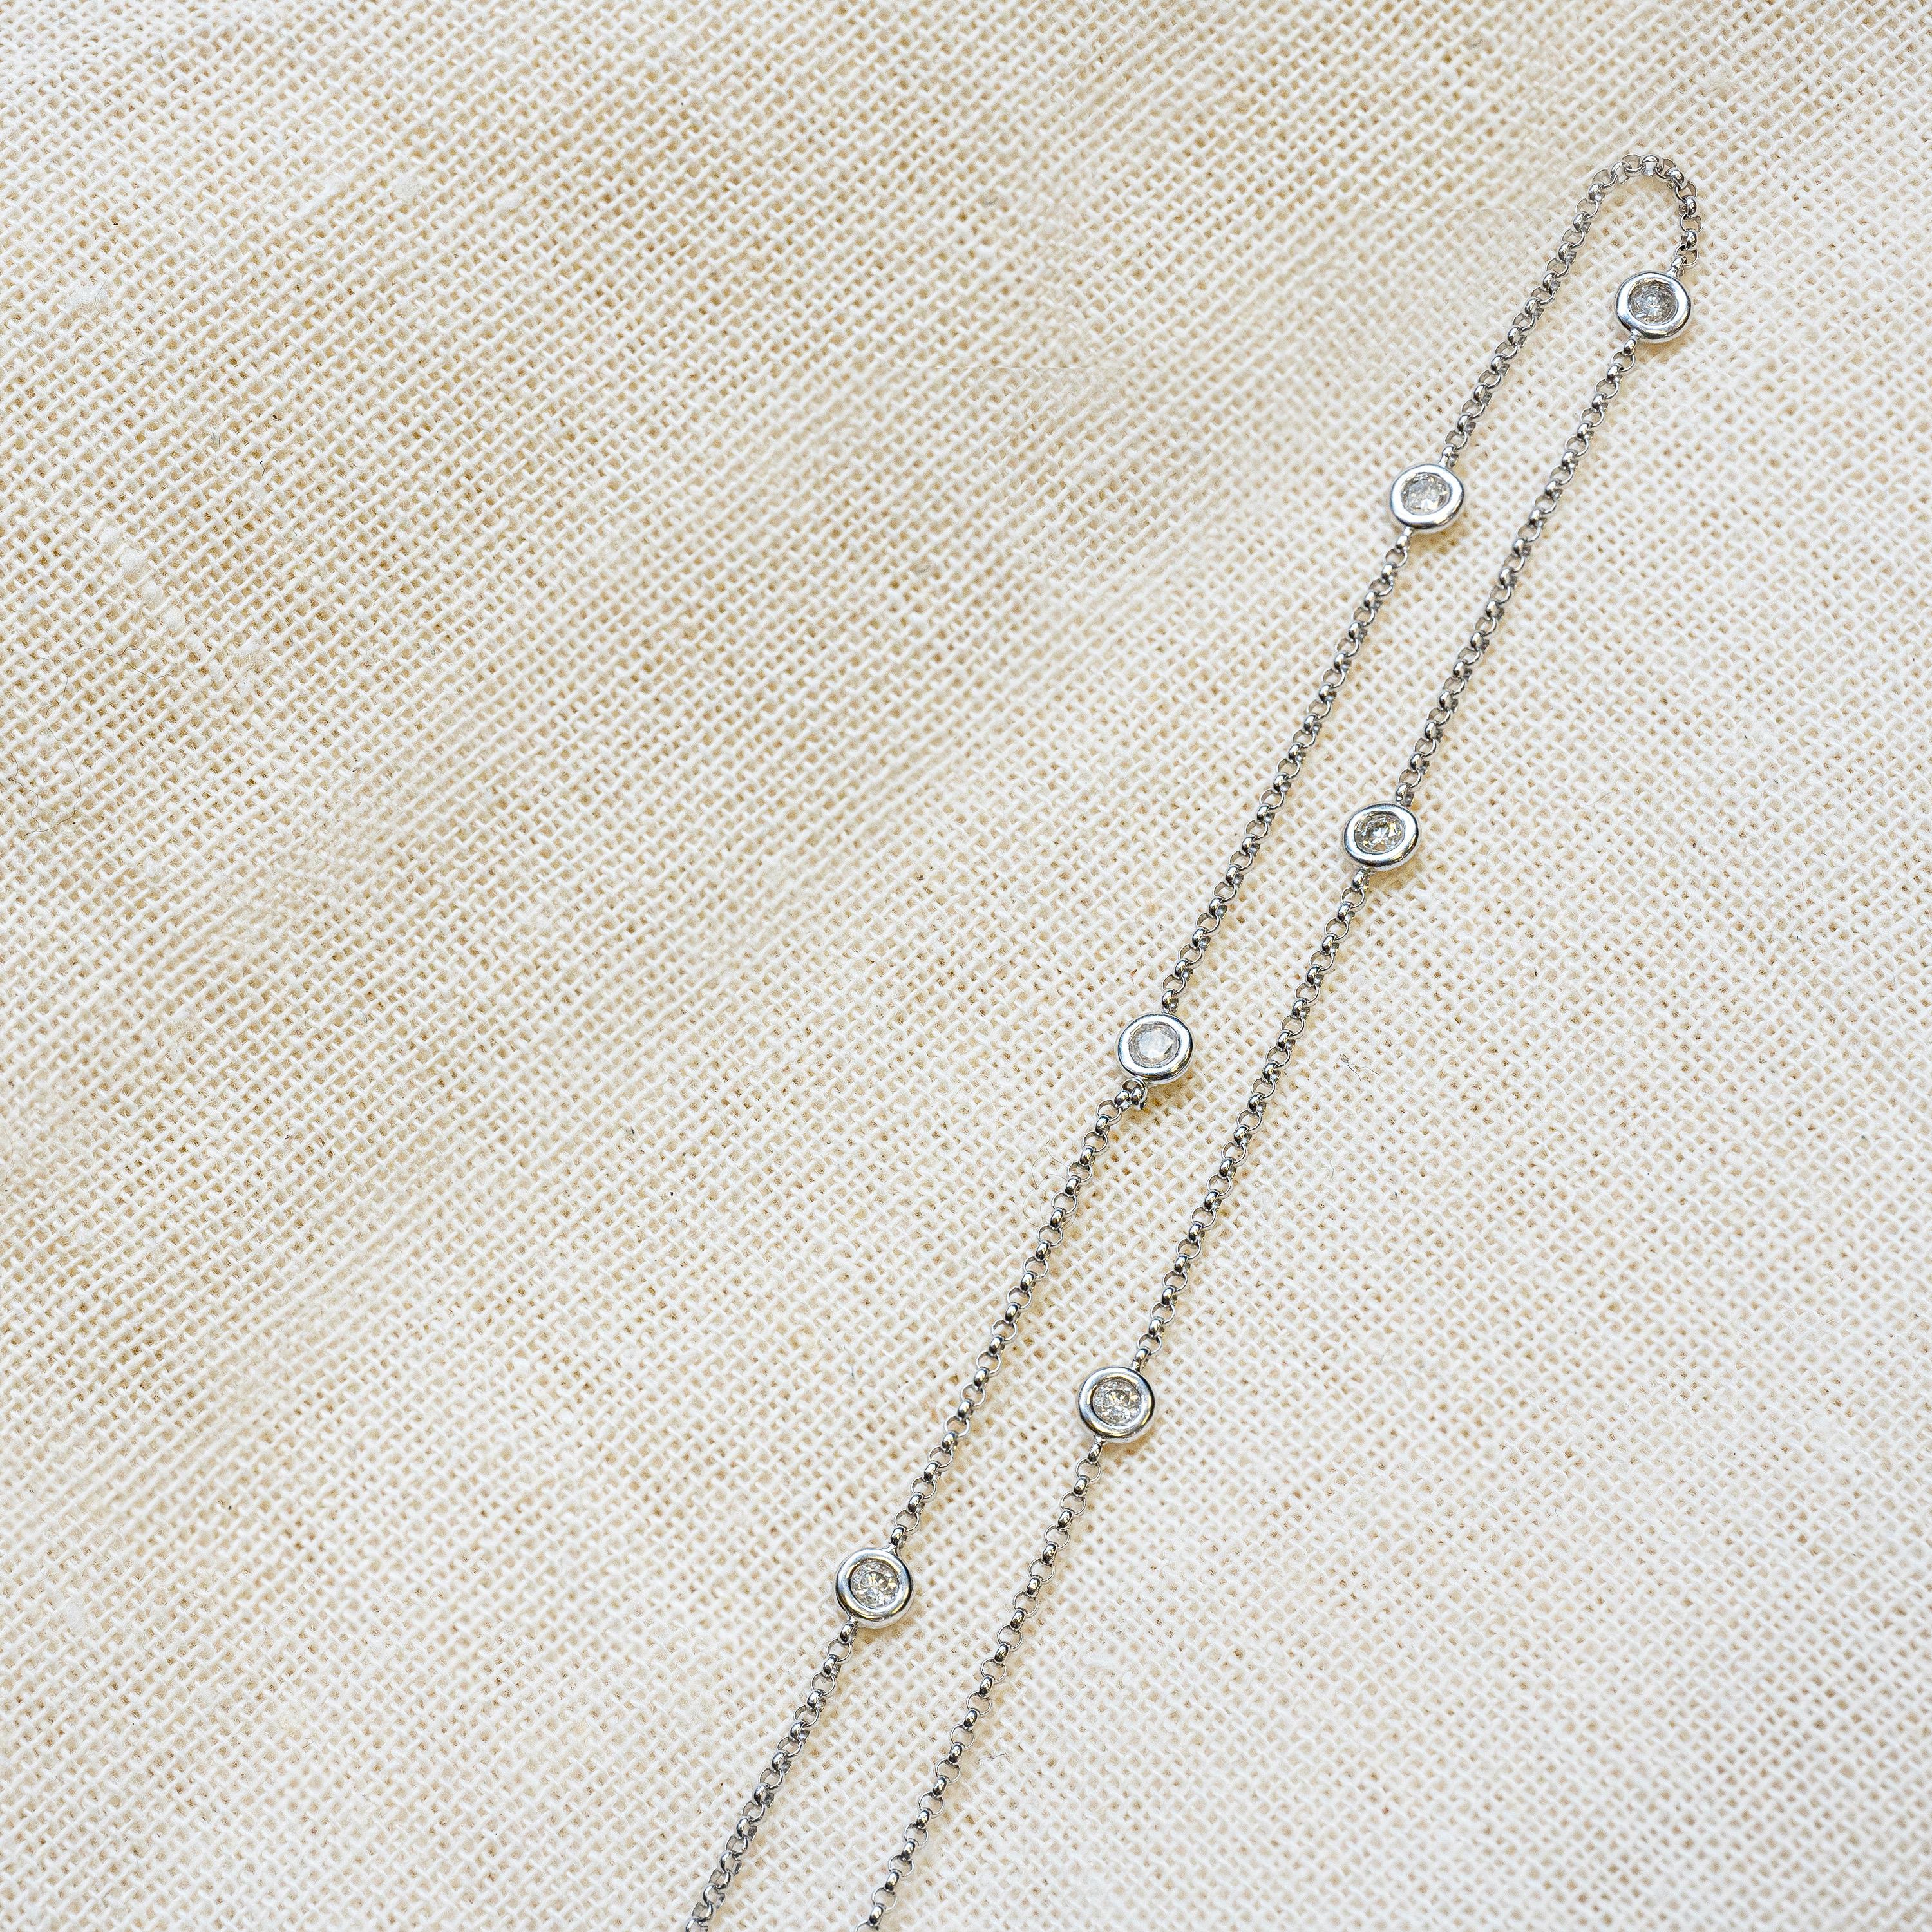 Exquisite and timeless, this 18 carat white gold station necklace highlights 7 fine quality round brilliant cut diamonds weighing 0.70ct combined. The stones are perfectly mounted in individual rub-over settings on a delicate belcher chain measuring